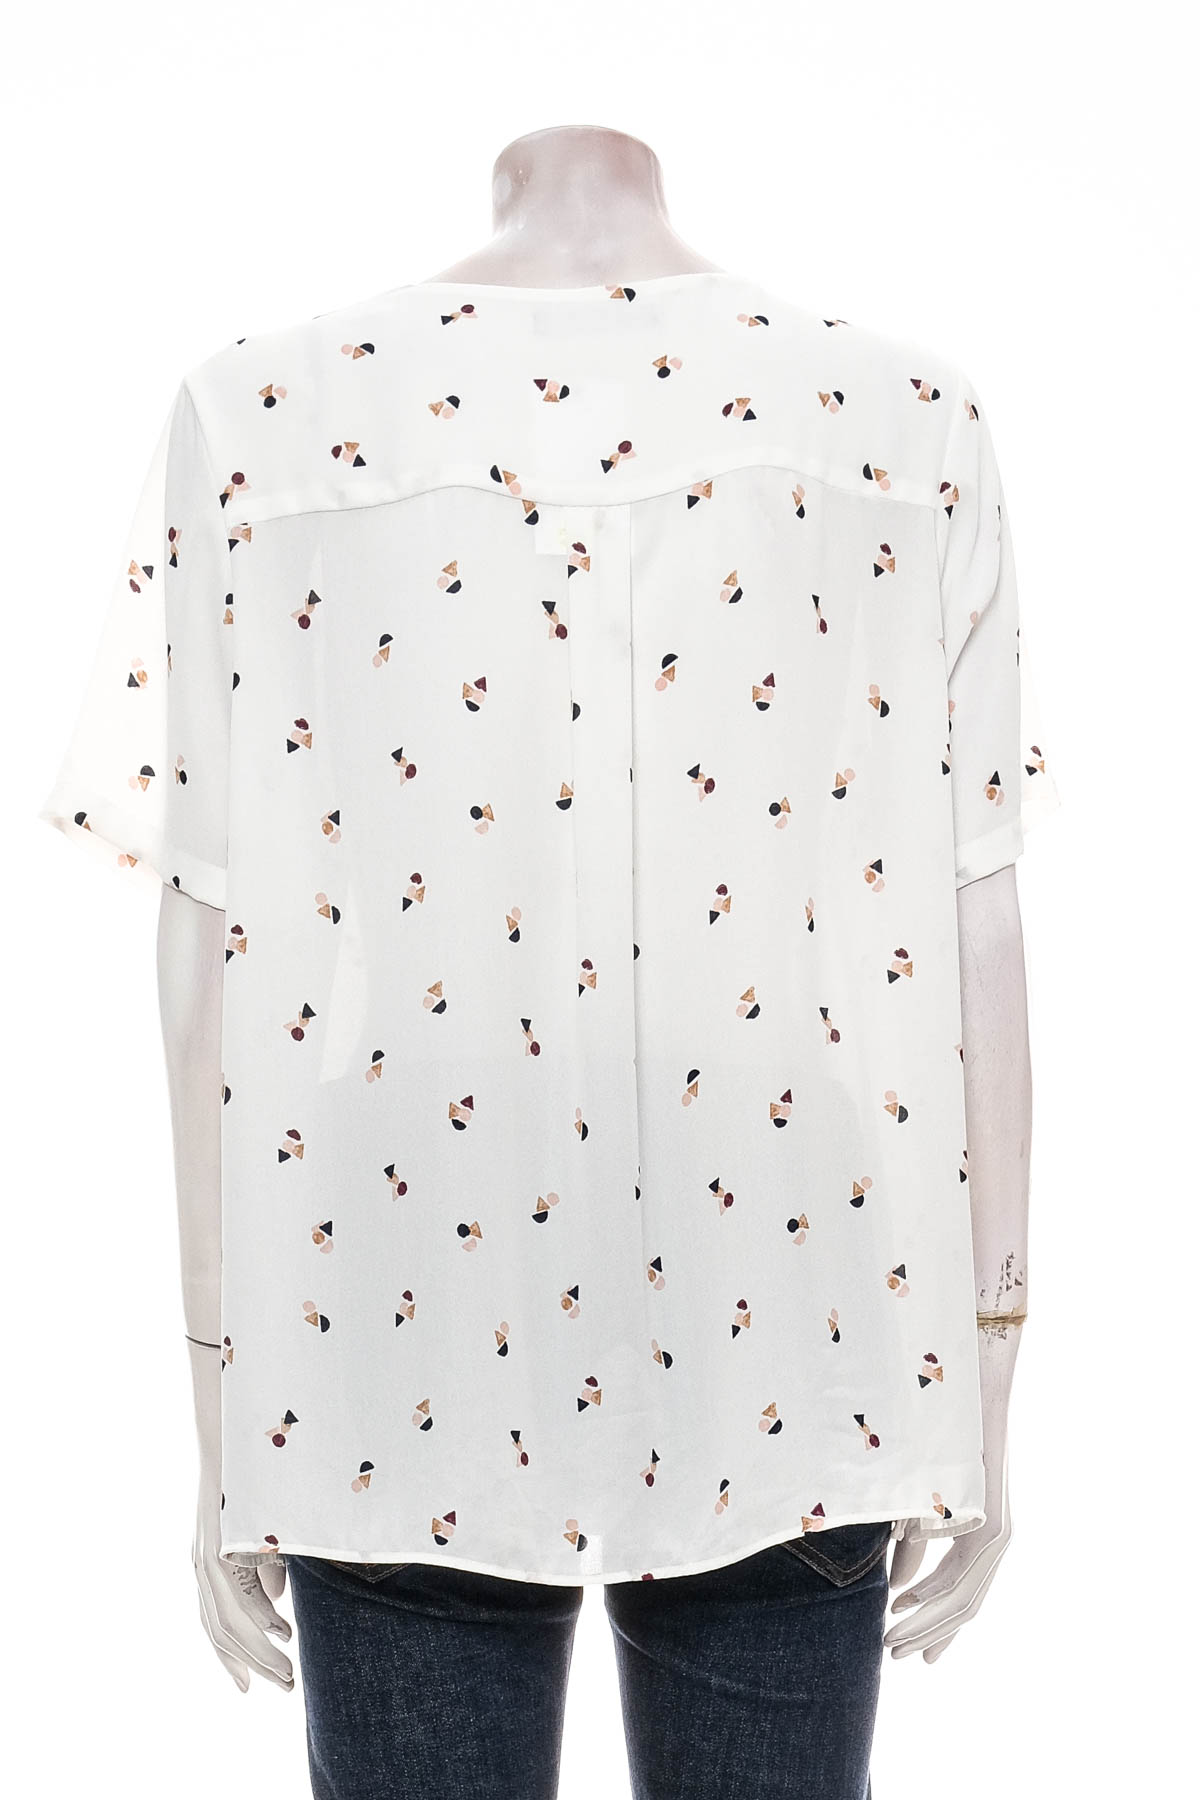 Women's shirt - M&S COLLECTION - 1